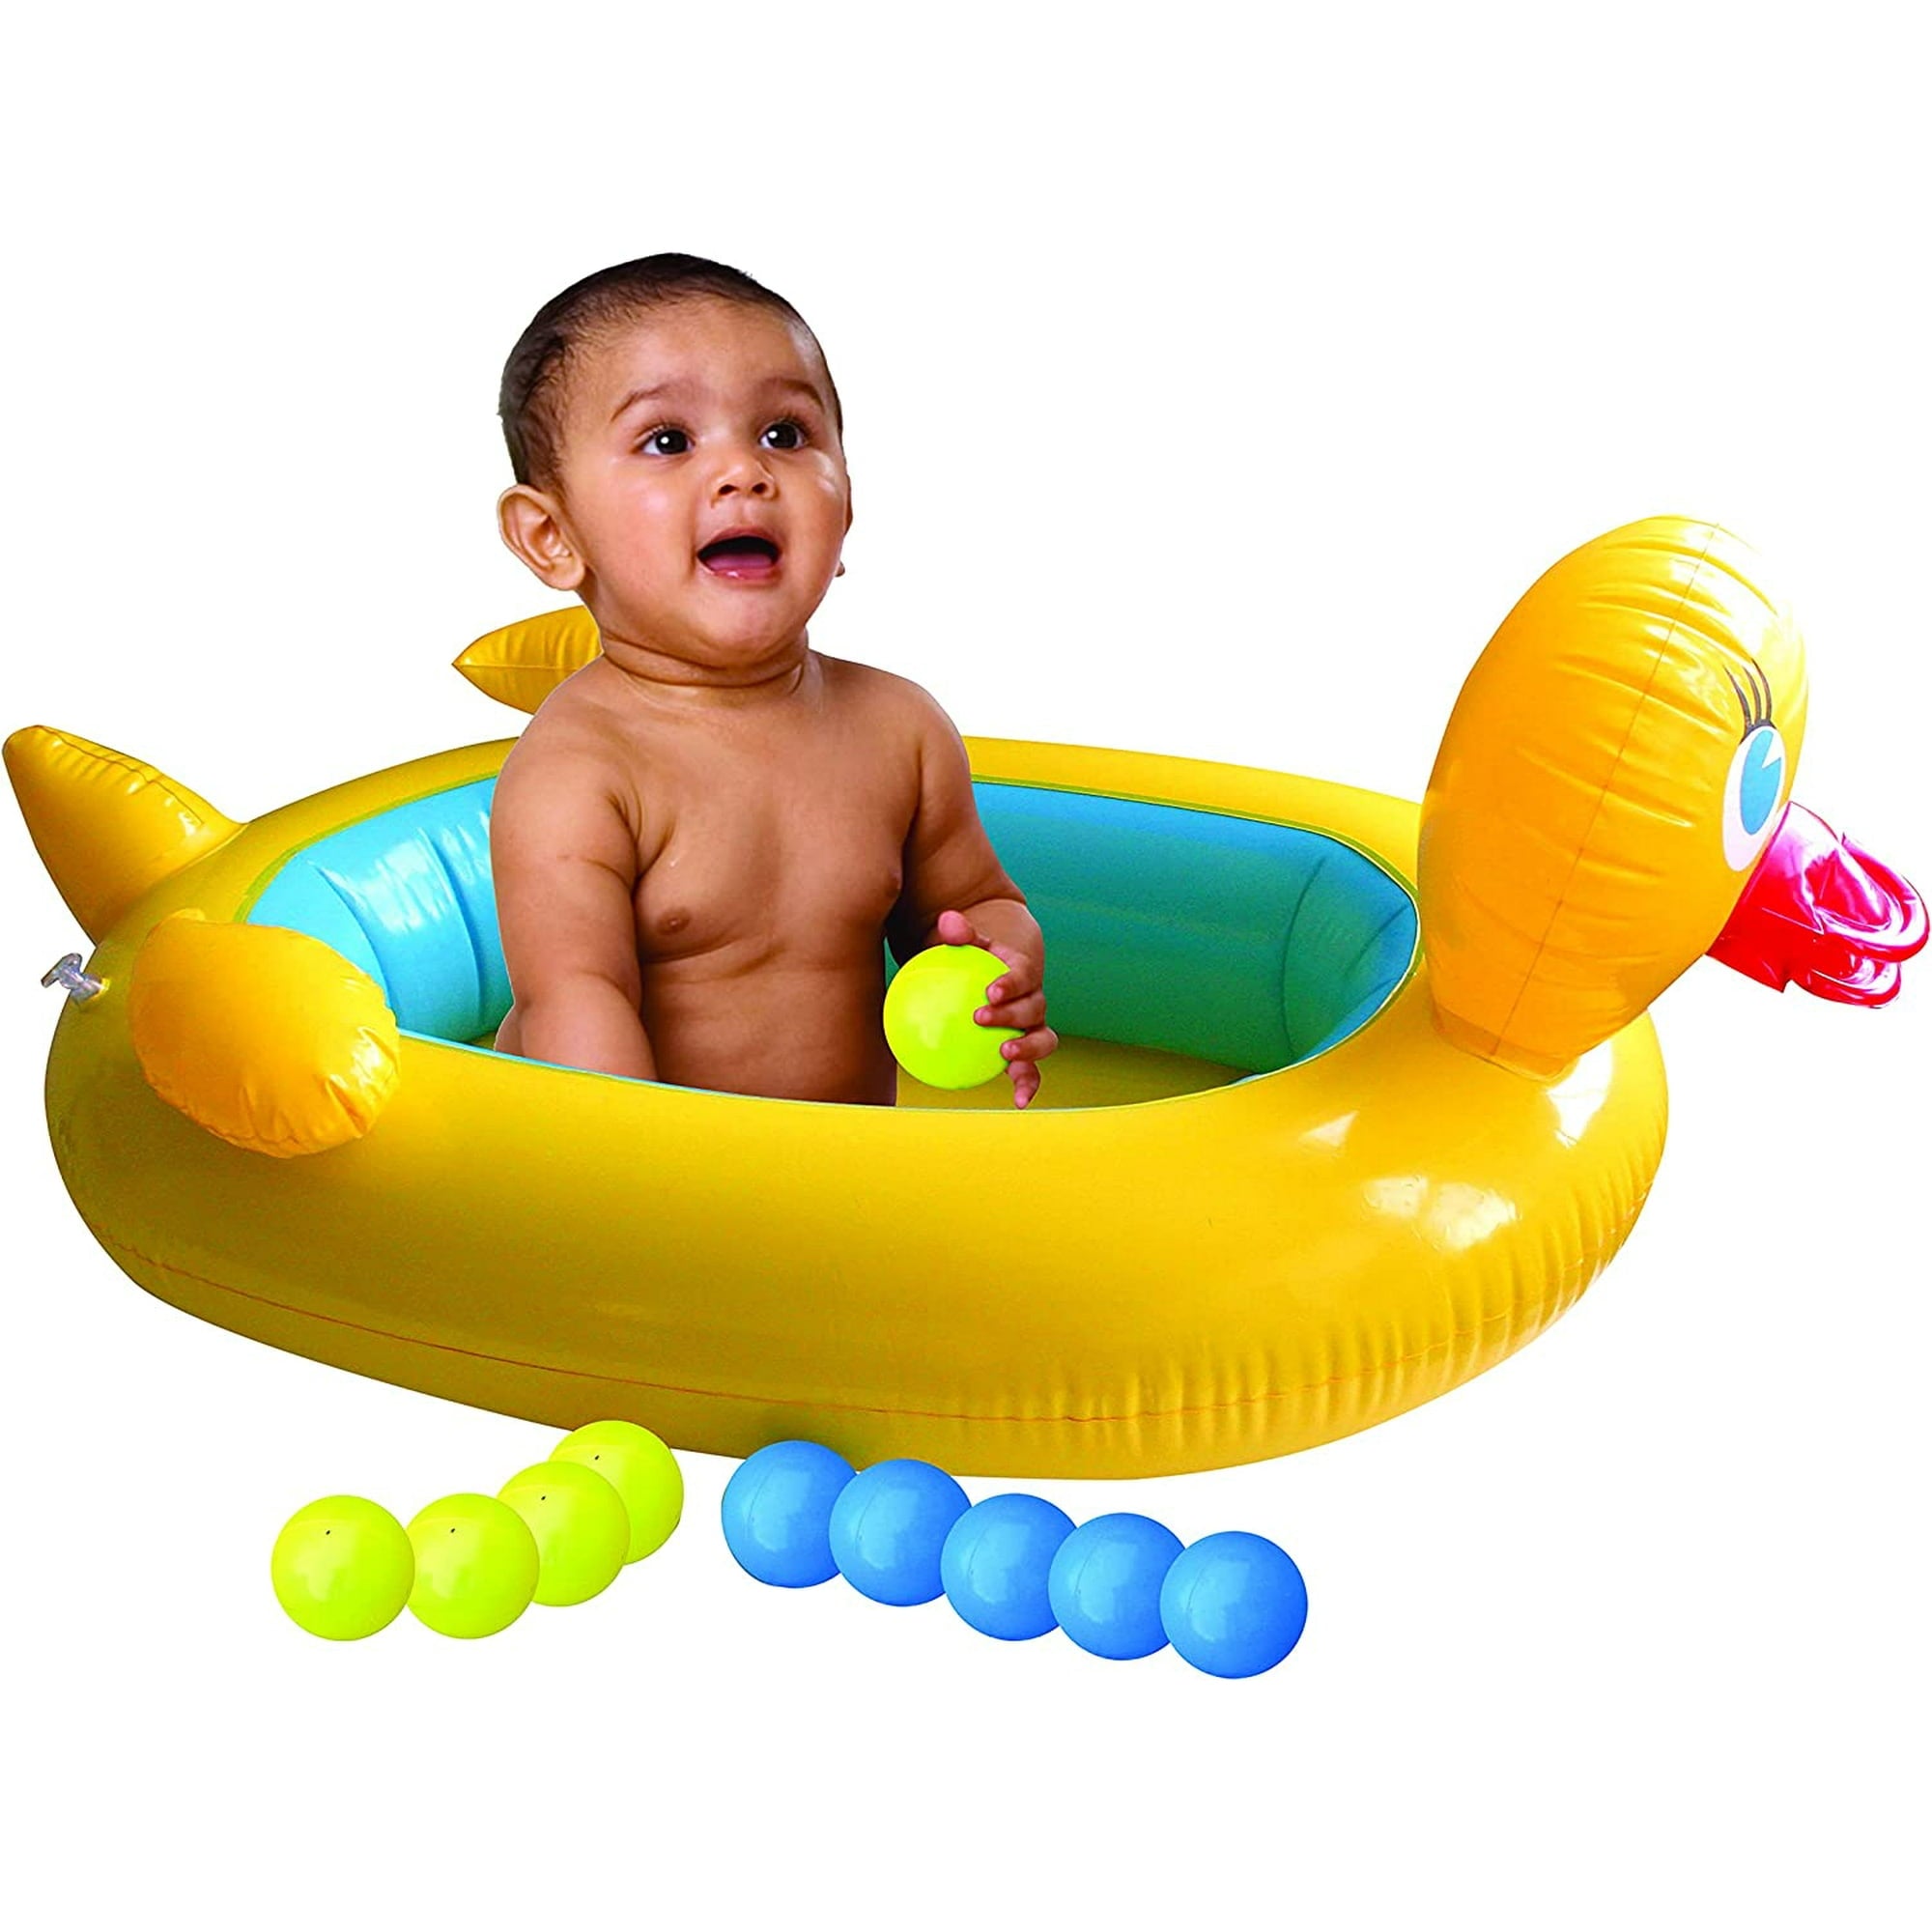 ETNA TOYS - Inflatable Duck Kiddie Pool for Toddlers with 10 Floating Balls - Baby Inflatable Mini Pool- Cute Baby Pool for Indoor and Outdoor Use - Deflates and Folds Easily